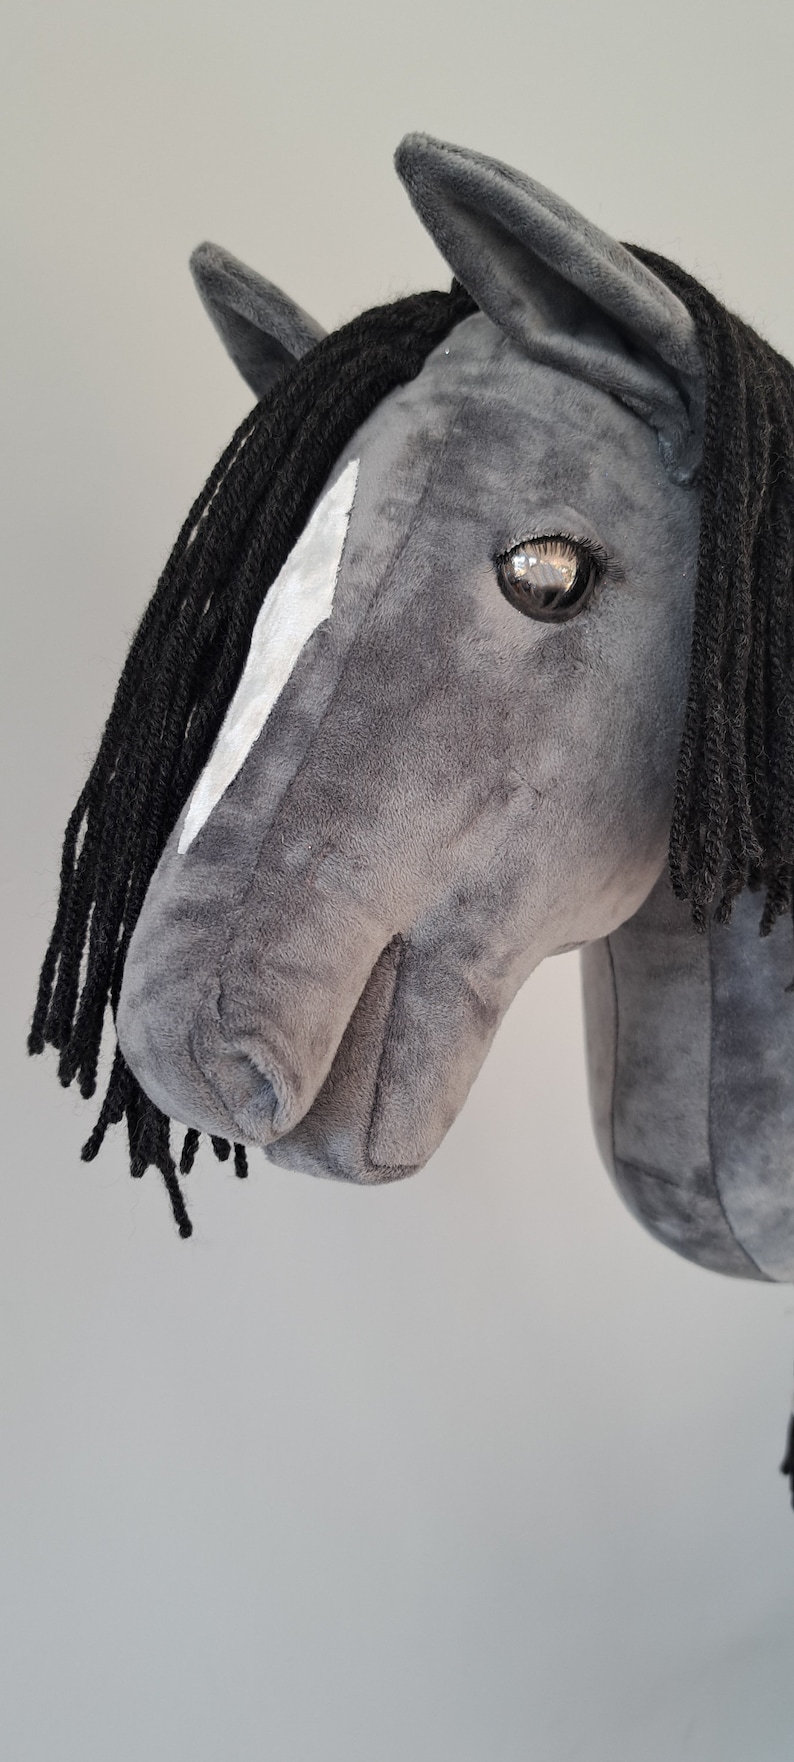 Hobby Horse GRAY with a spot image 3